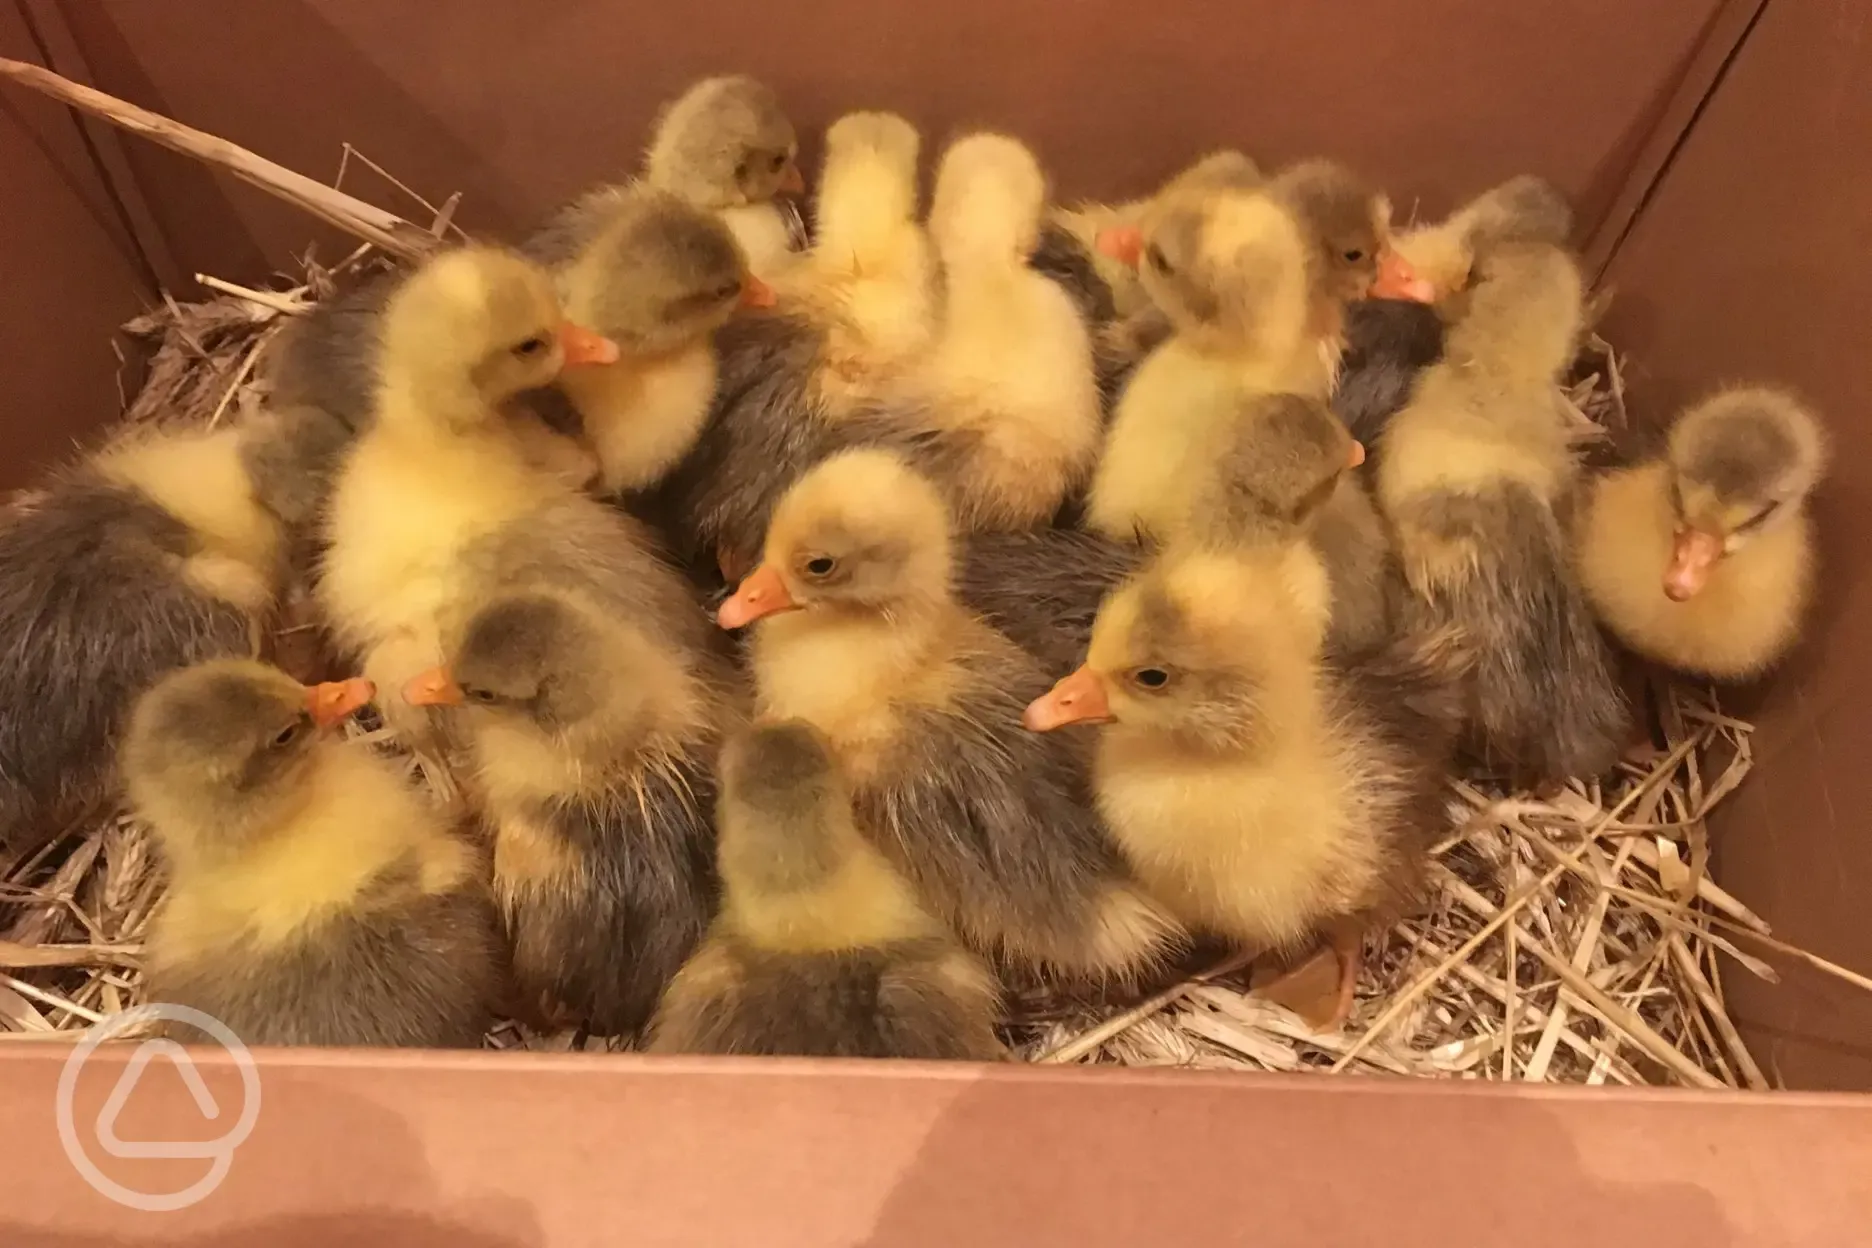 Another hatch of goslings